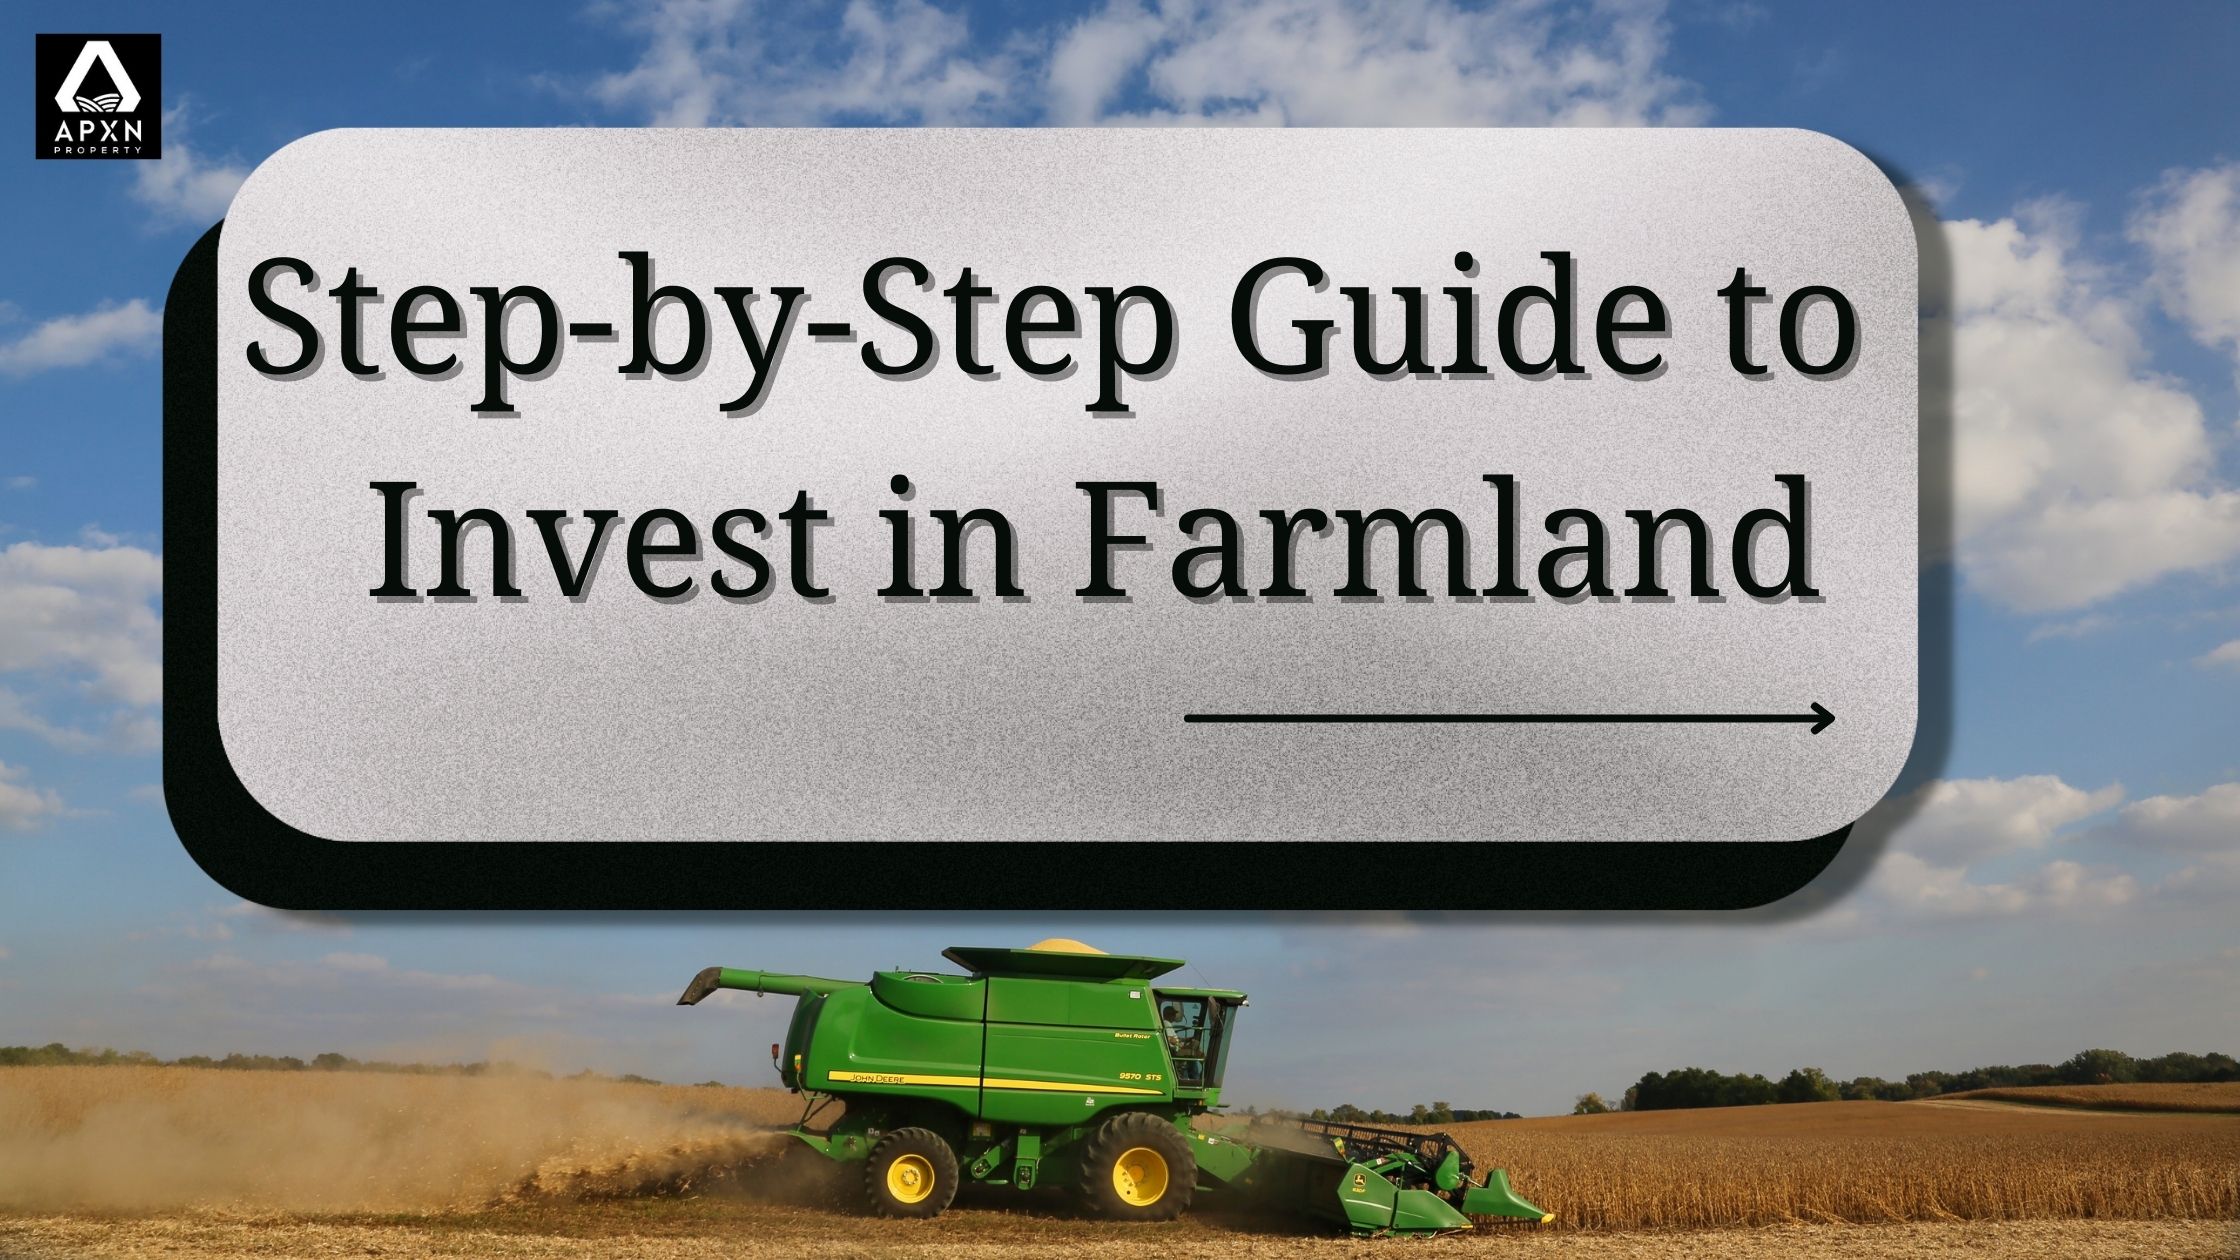 Step-by-step guide to invest in farmaland